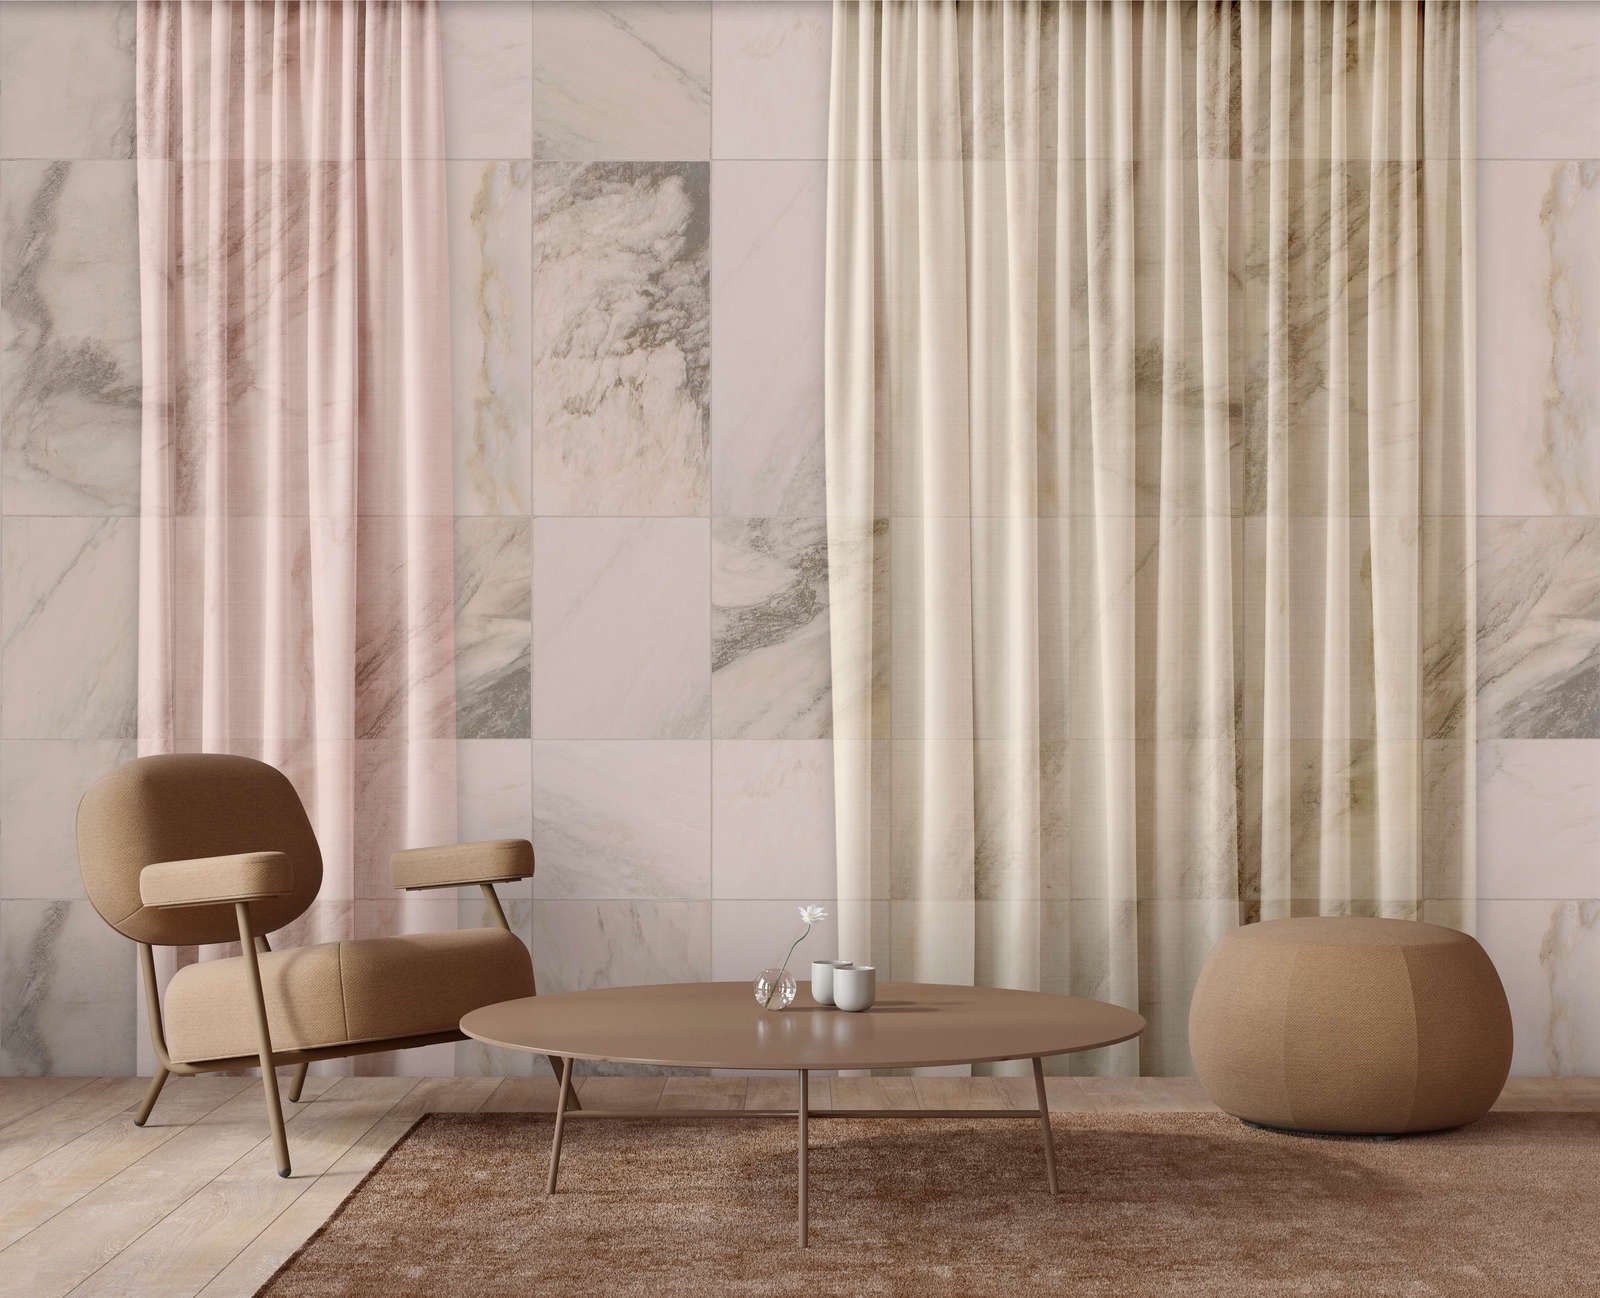             Photo wallpaper »nova 3« - Subtly falling curtains against a beige marble wall - Lightly textured non-woven fabric
        